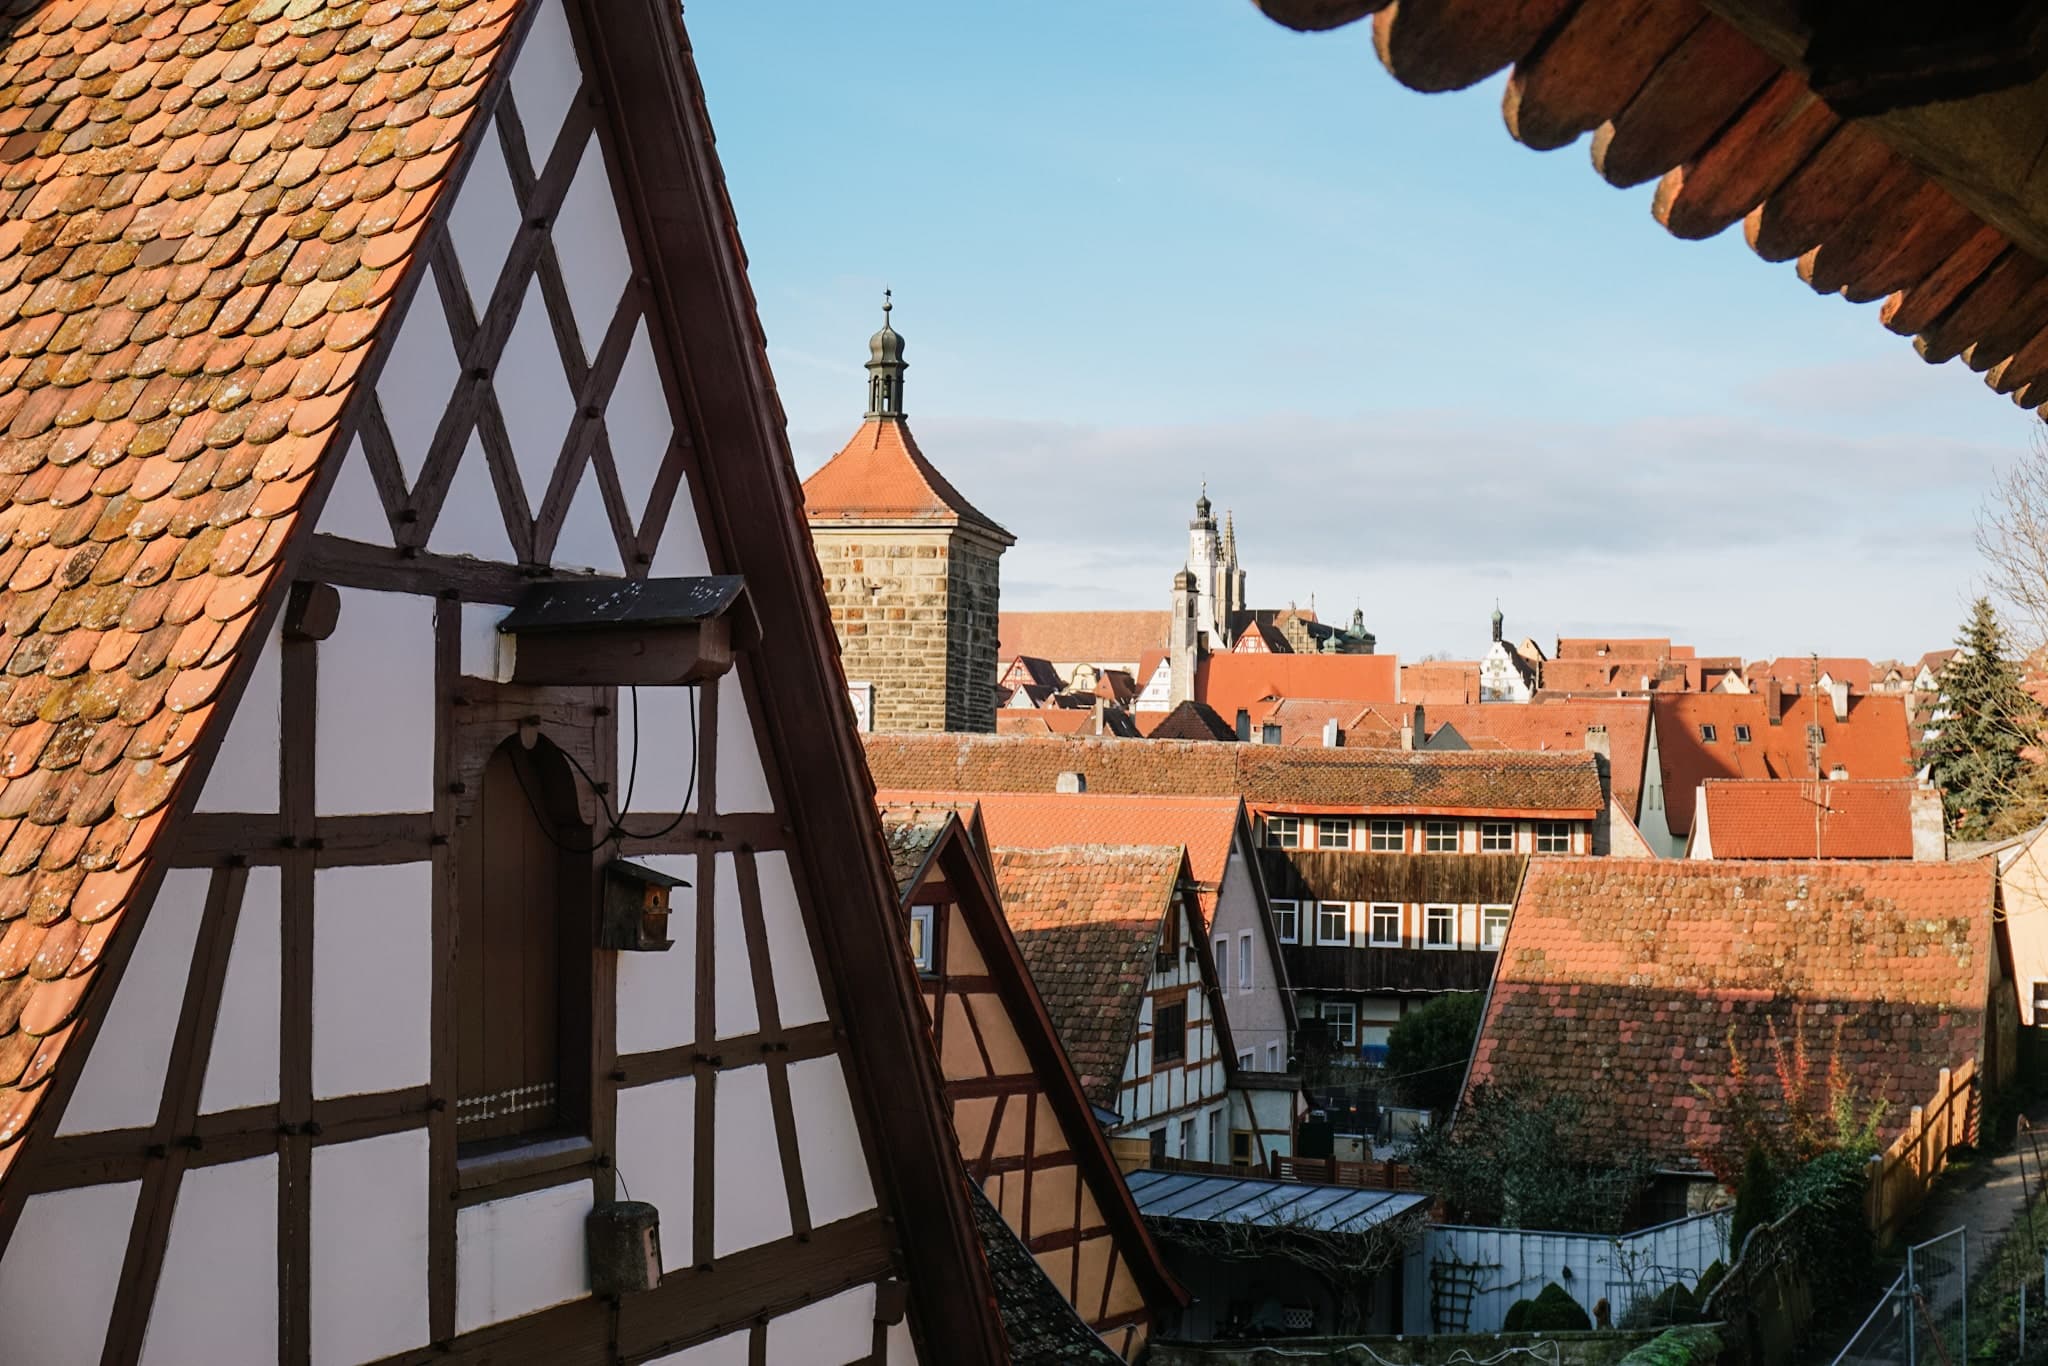 You are currently viewing Rothenburg ob der Tauber